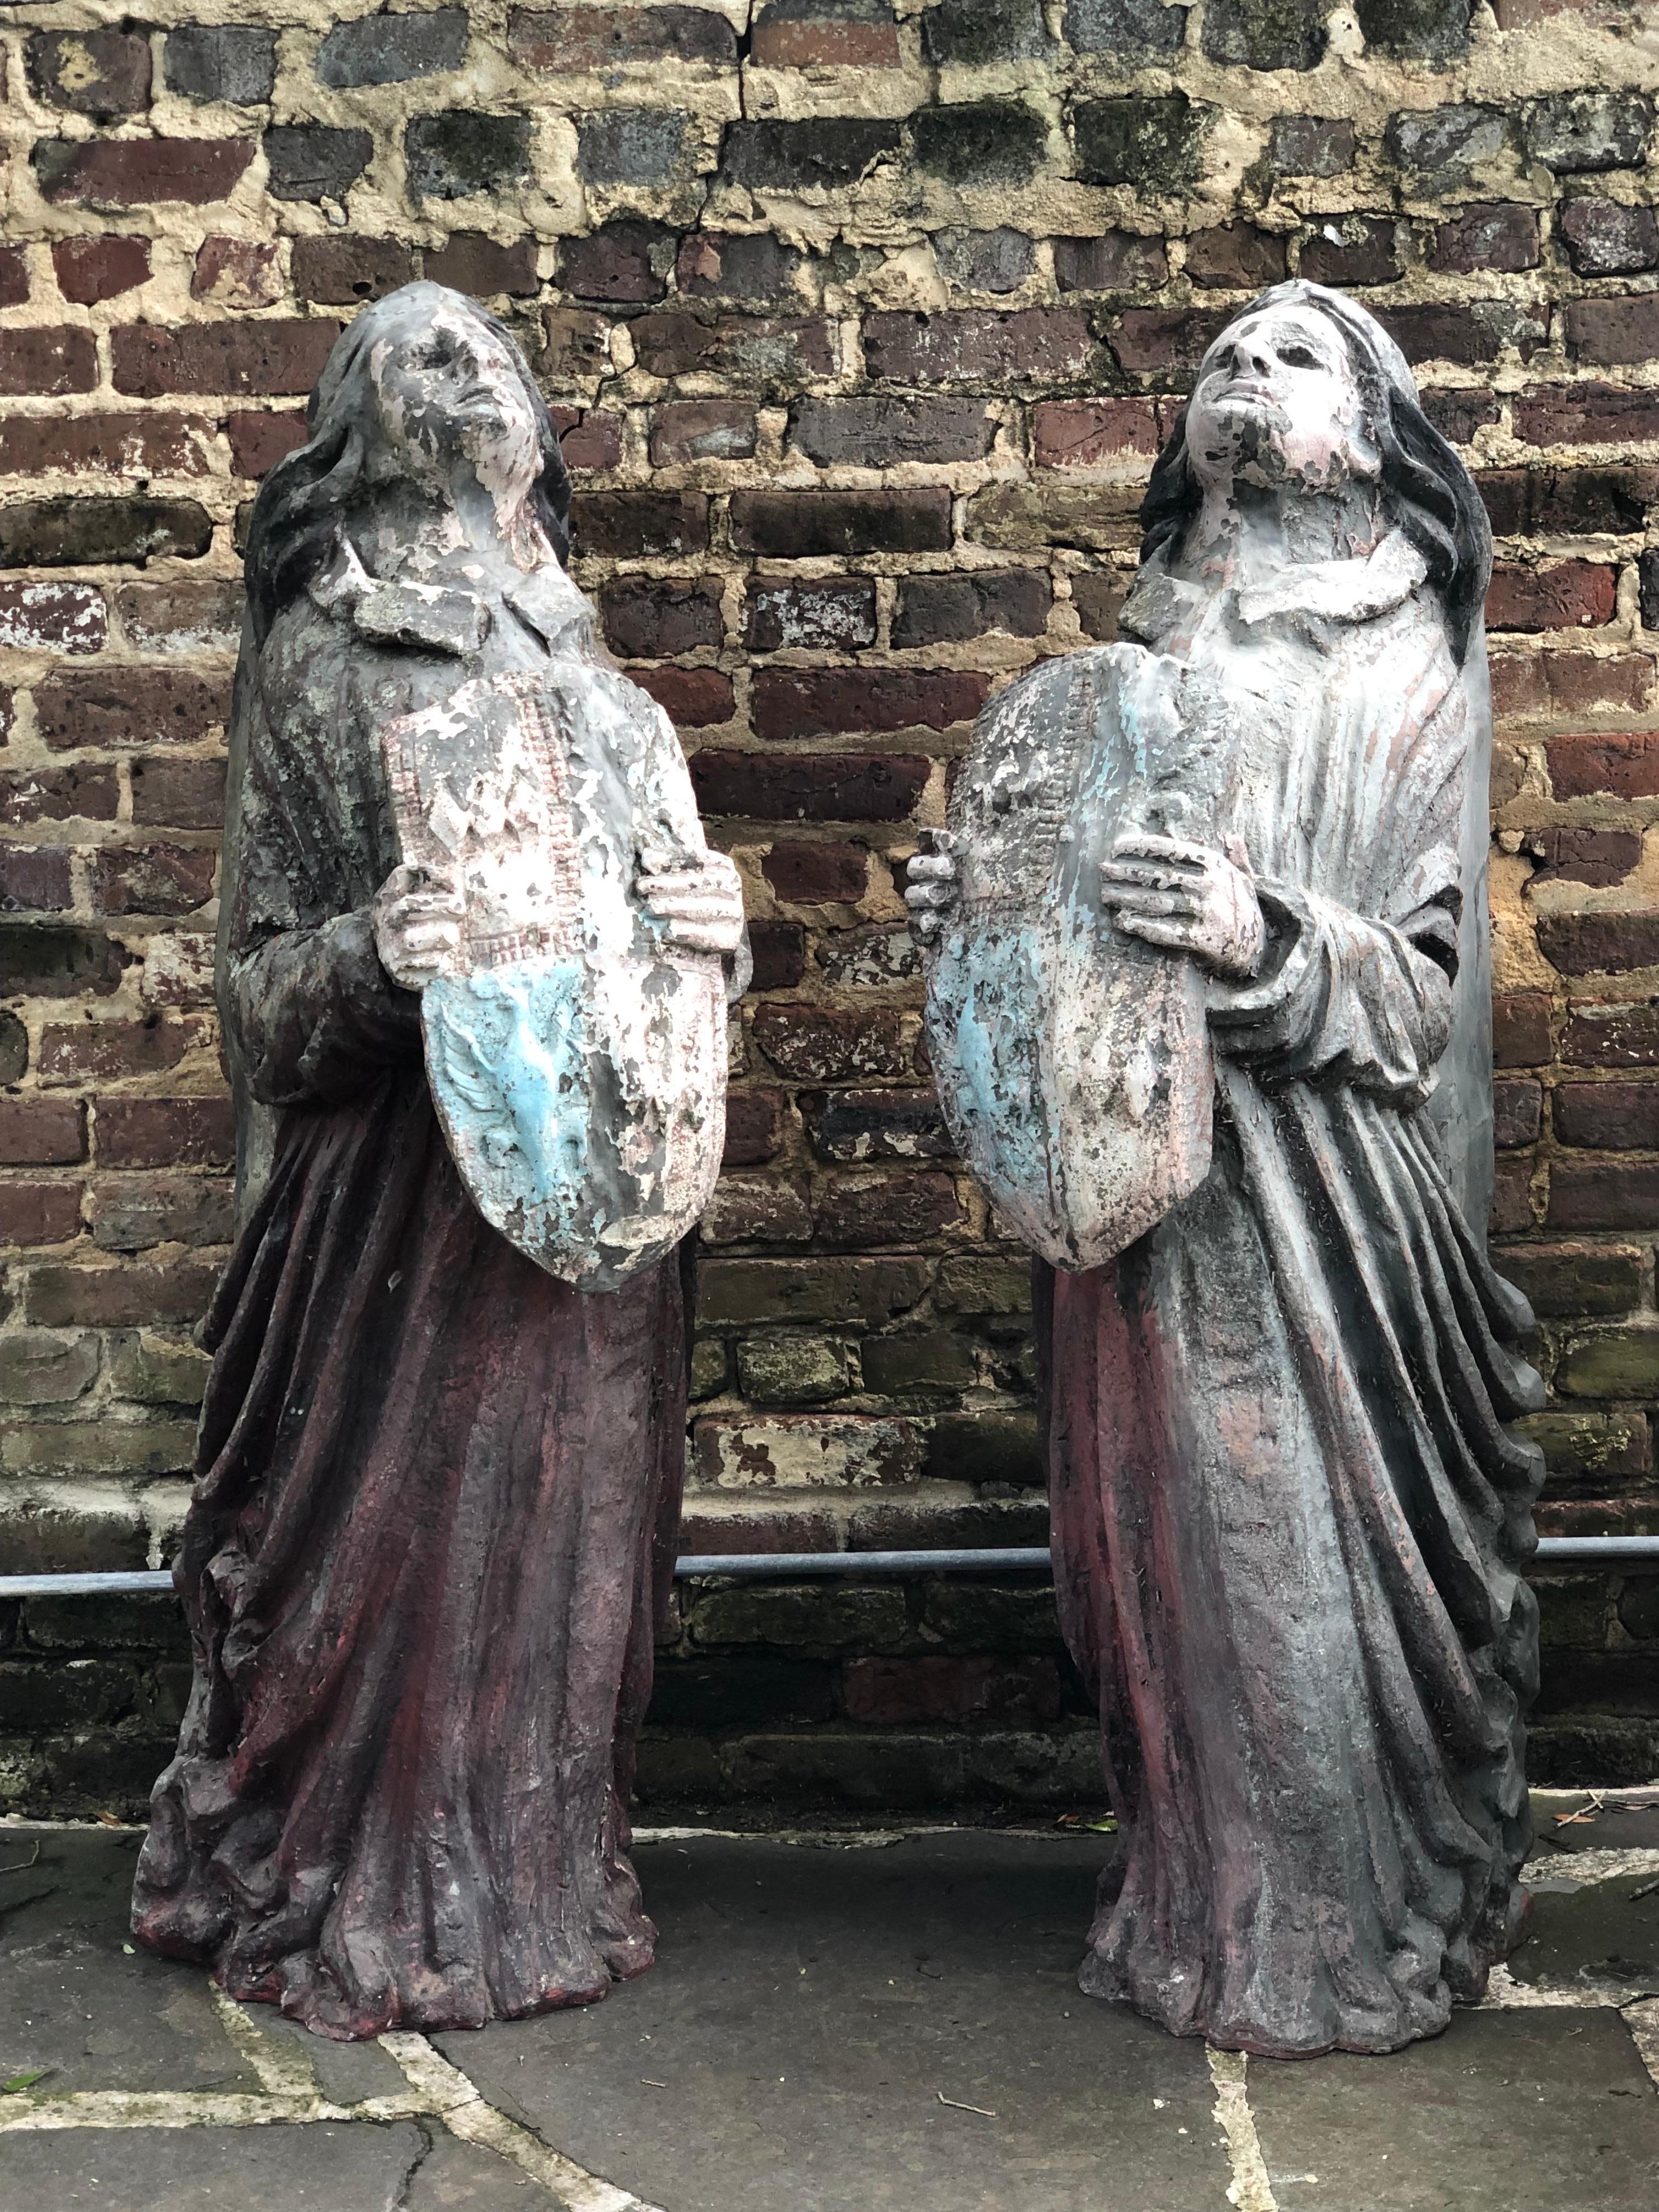 Two Graceful Garden Sculptures of Architectural Brackets / Nautical Figureheads. From a New York City Rooftop Garden with great Weathered Patina. Signed 